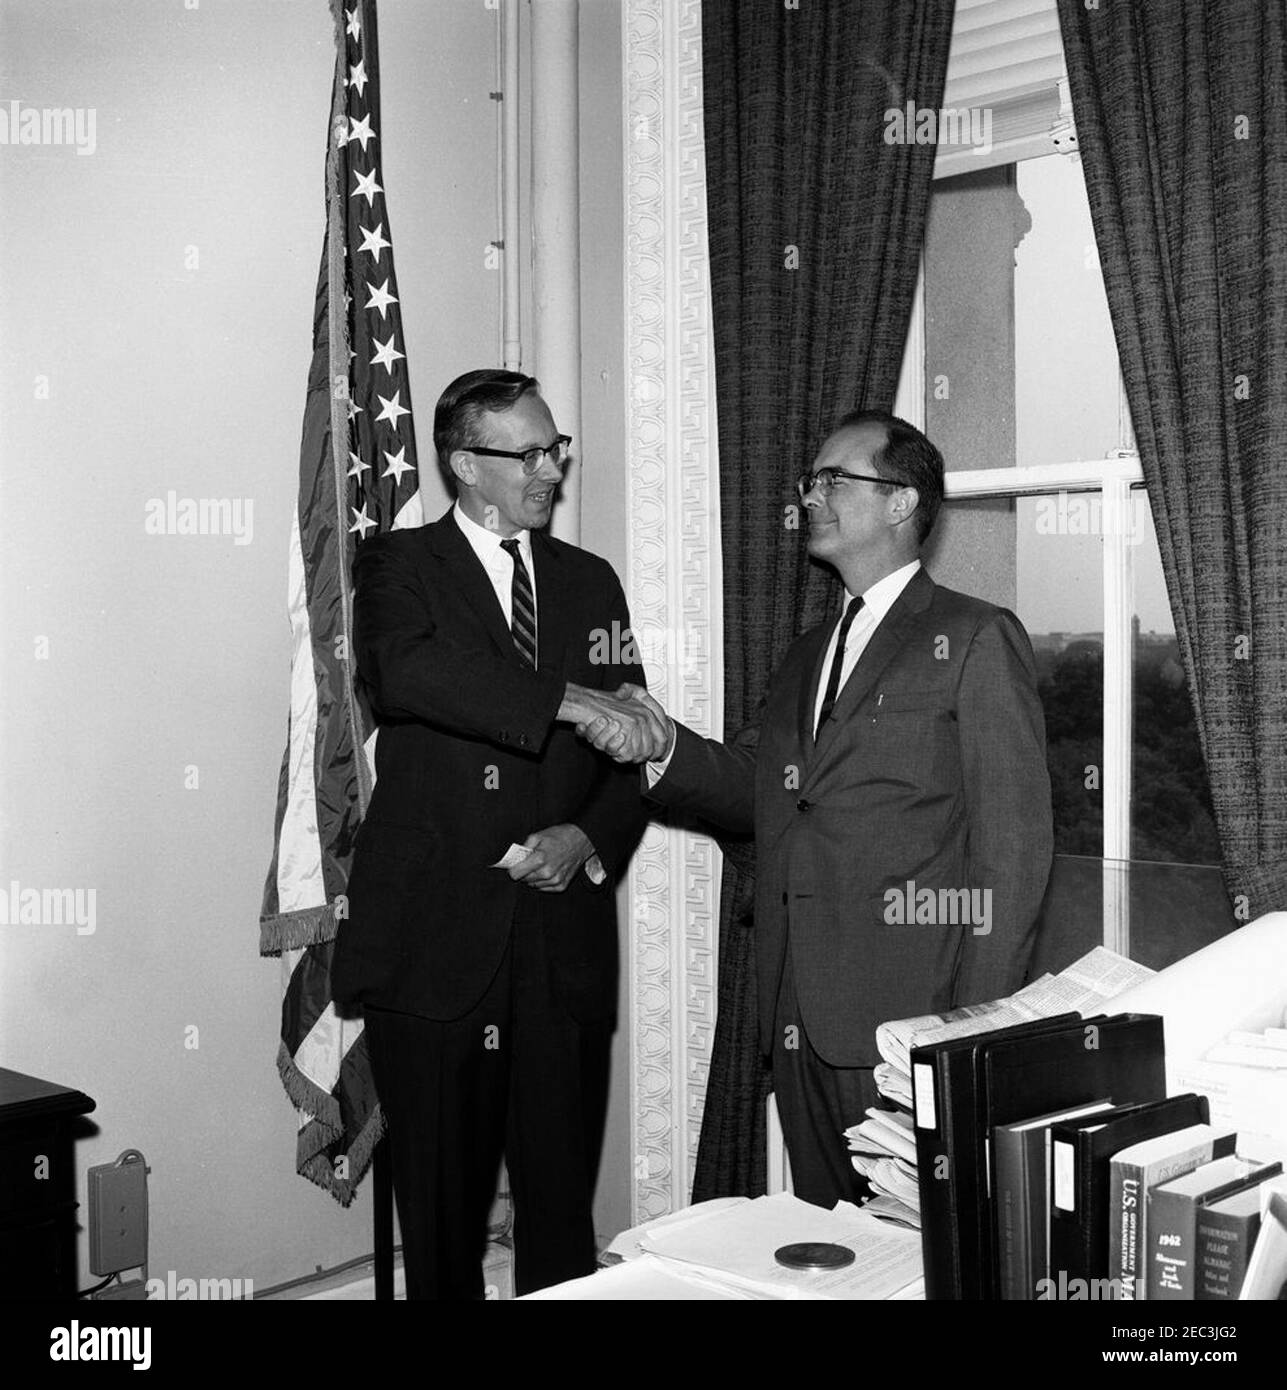 Swearing-in ceremony, Gardner Ackley, Member, Council of Economic Advisers (CEA). Chairman of the Council of Economic Advisers (CEA), Walter W. Heller (left), shakes hands with Gardner Ackley at Mr. Ackleyu0027s swearing-in as a member of the CEA. Location undetermined. Stock Photo